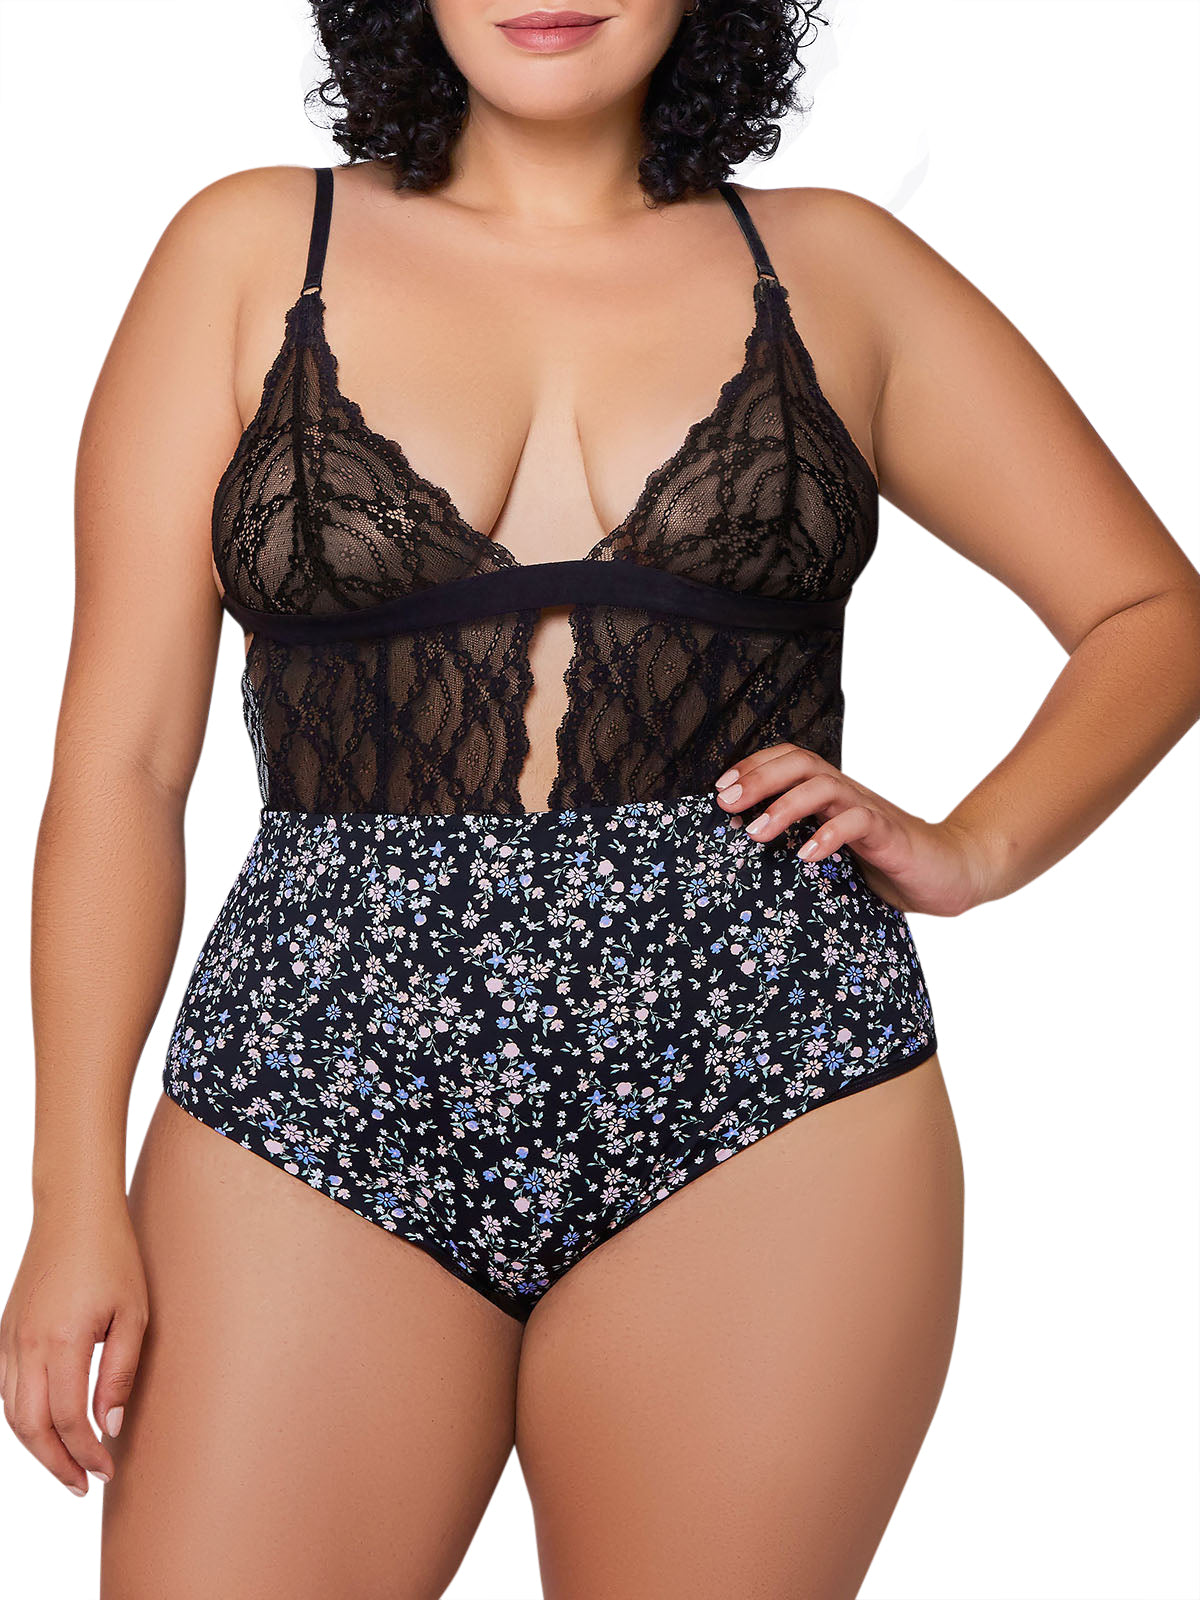 iCollection Plus Size Teddy Lingerie Hollyn Plus Size Teddy